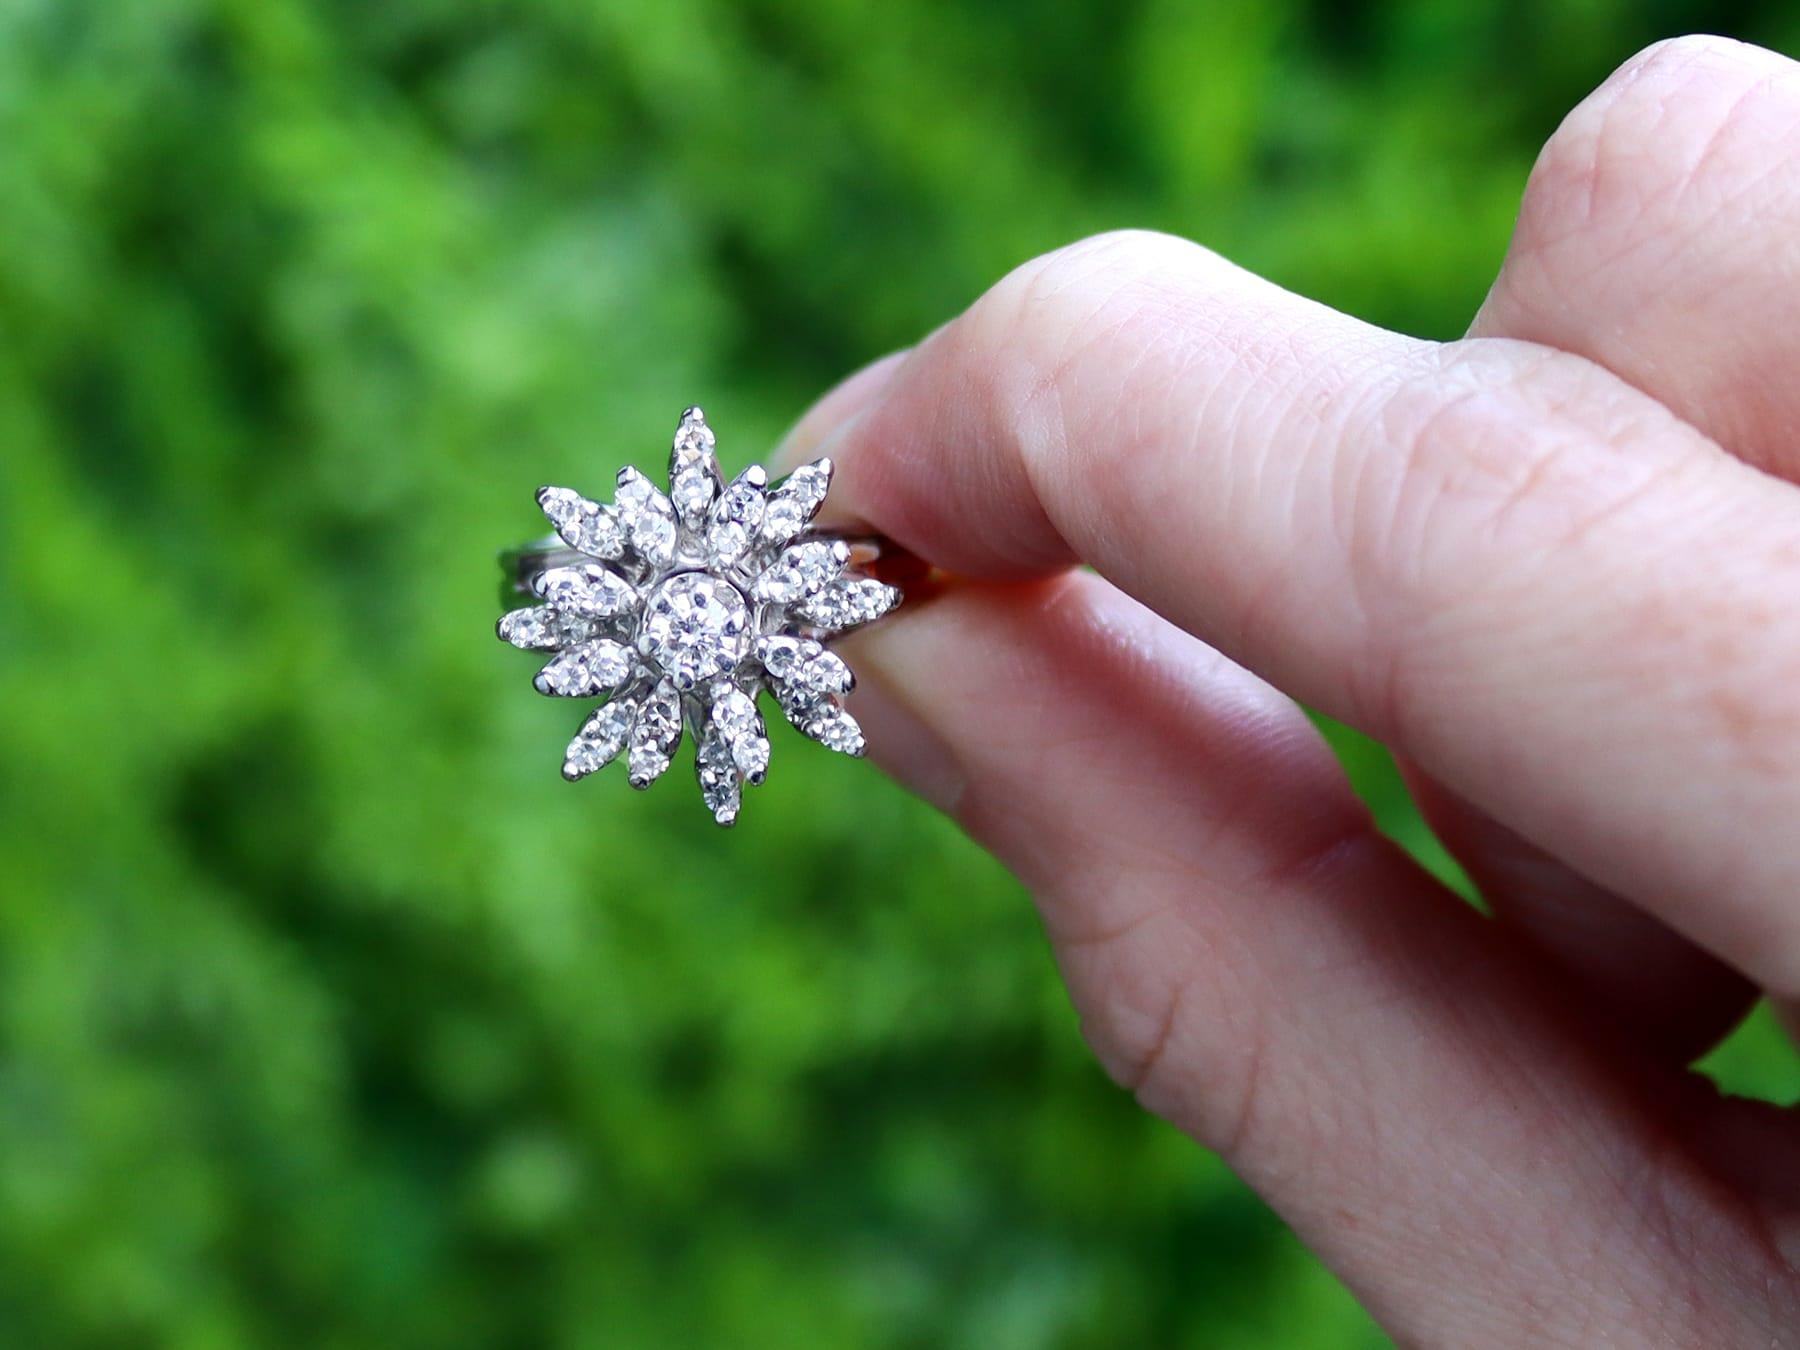 A fine and impressive vintage 0.95 carat diamond and 14 karat white gold cluster ring; part of our vintage jewelry and estate jewelry collections.

This impressive vintage diamond cluster/dress ring has been crafted in 14k white gold.

The